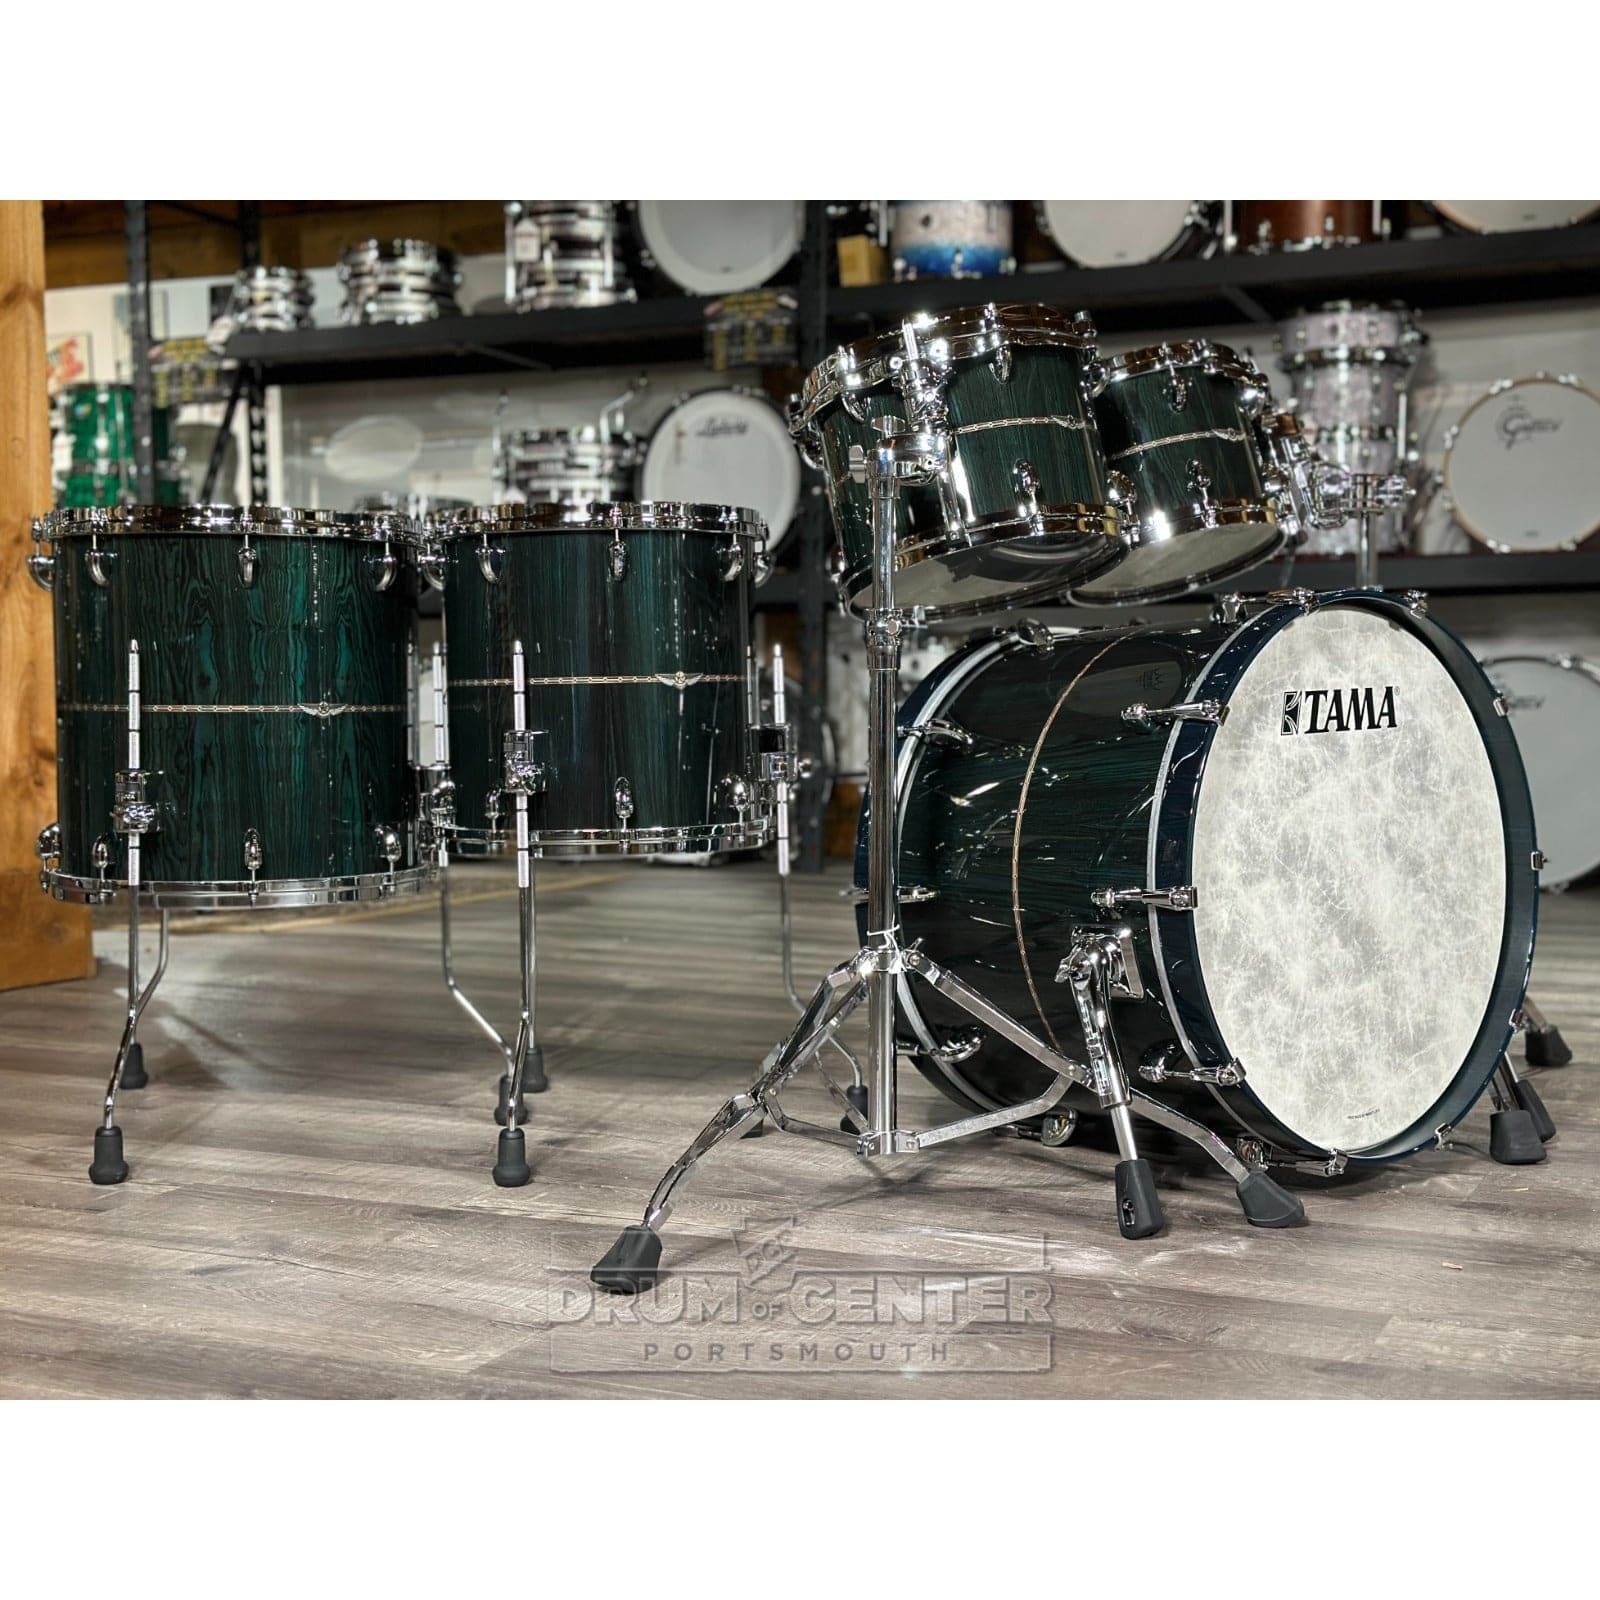 TAMA Drums - Official web site 